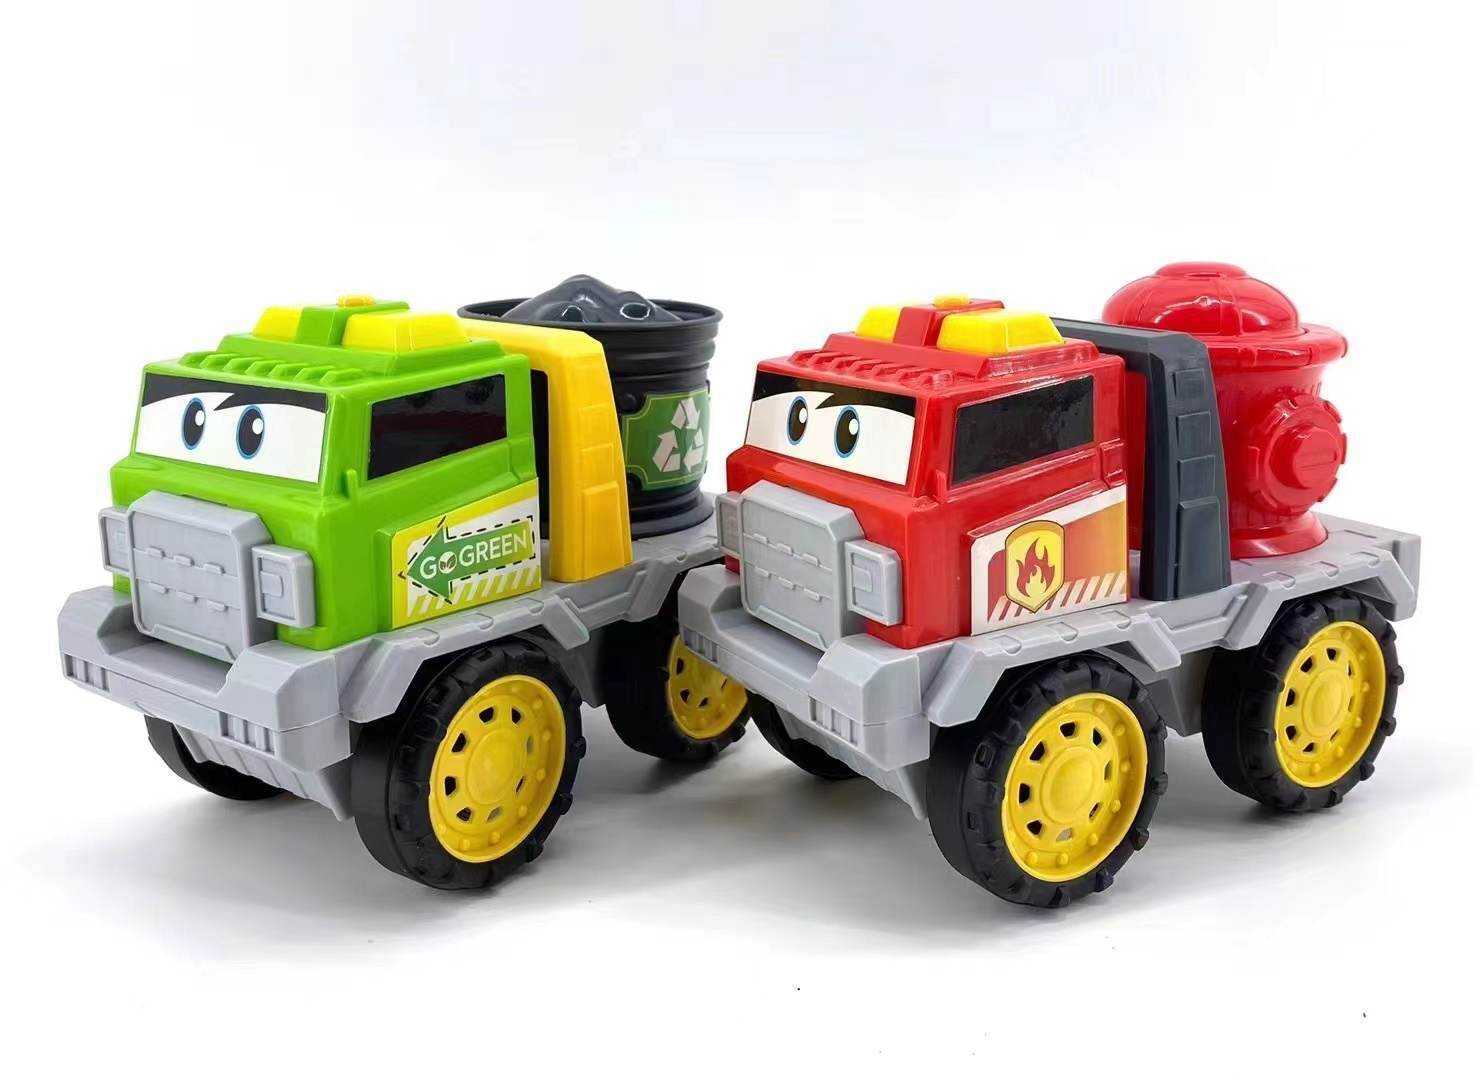 Toy Garbage Truck with Sound and Lights 18m+